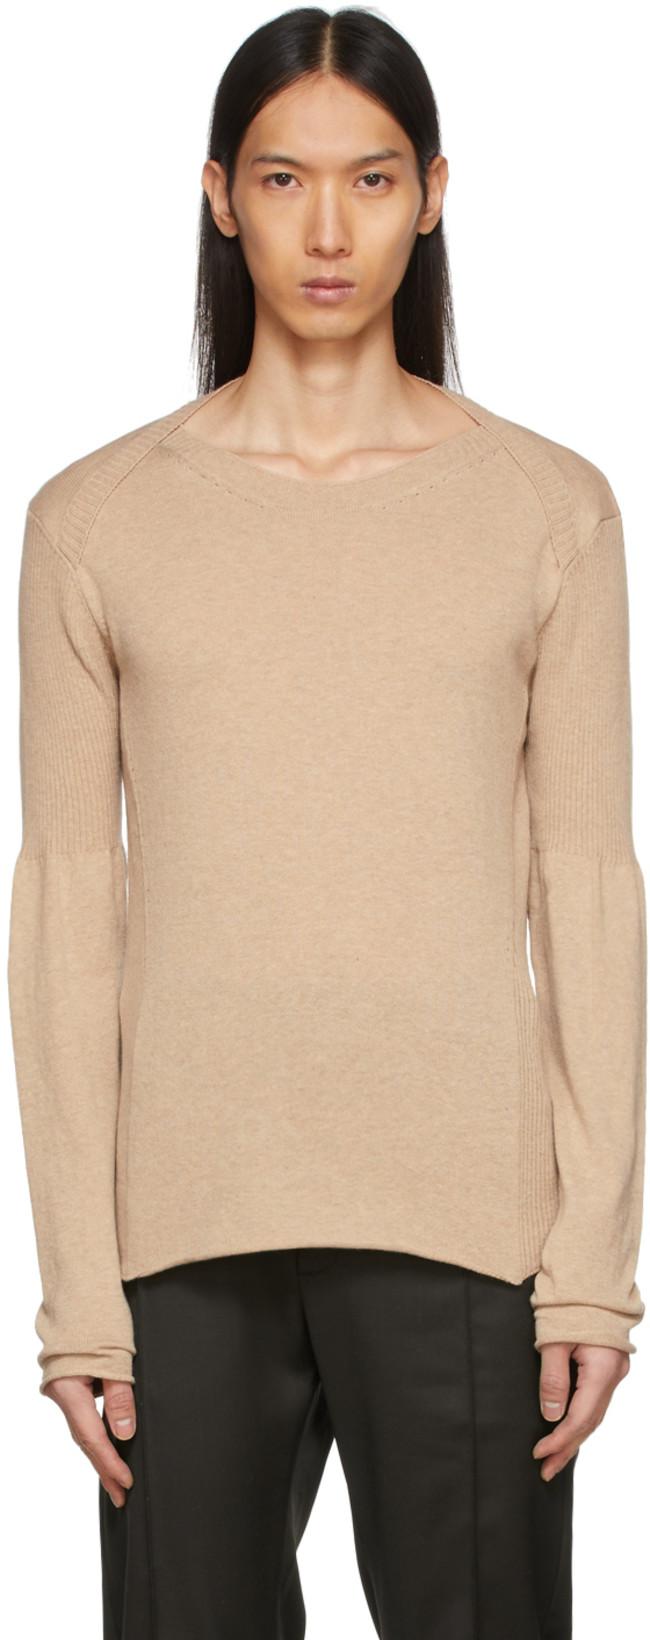 SSENSE Exclusive Beige Milano Long Sleeve T-Shirt by ADYAR